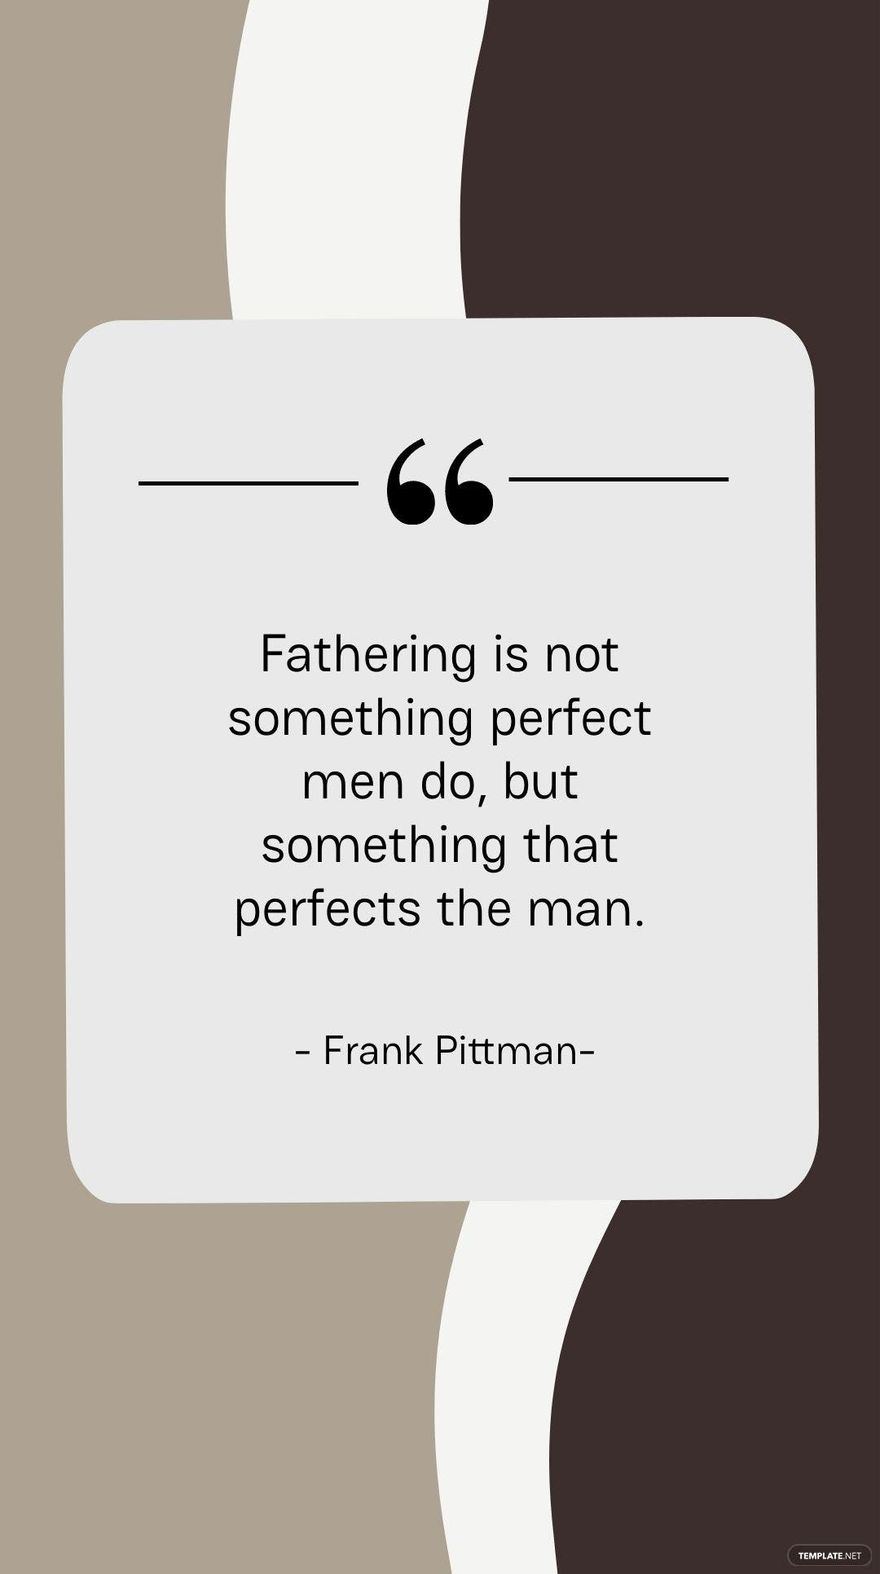 Frank Pittman - Fathering is not something perfect men do, but something that perfects the man.